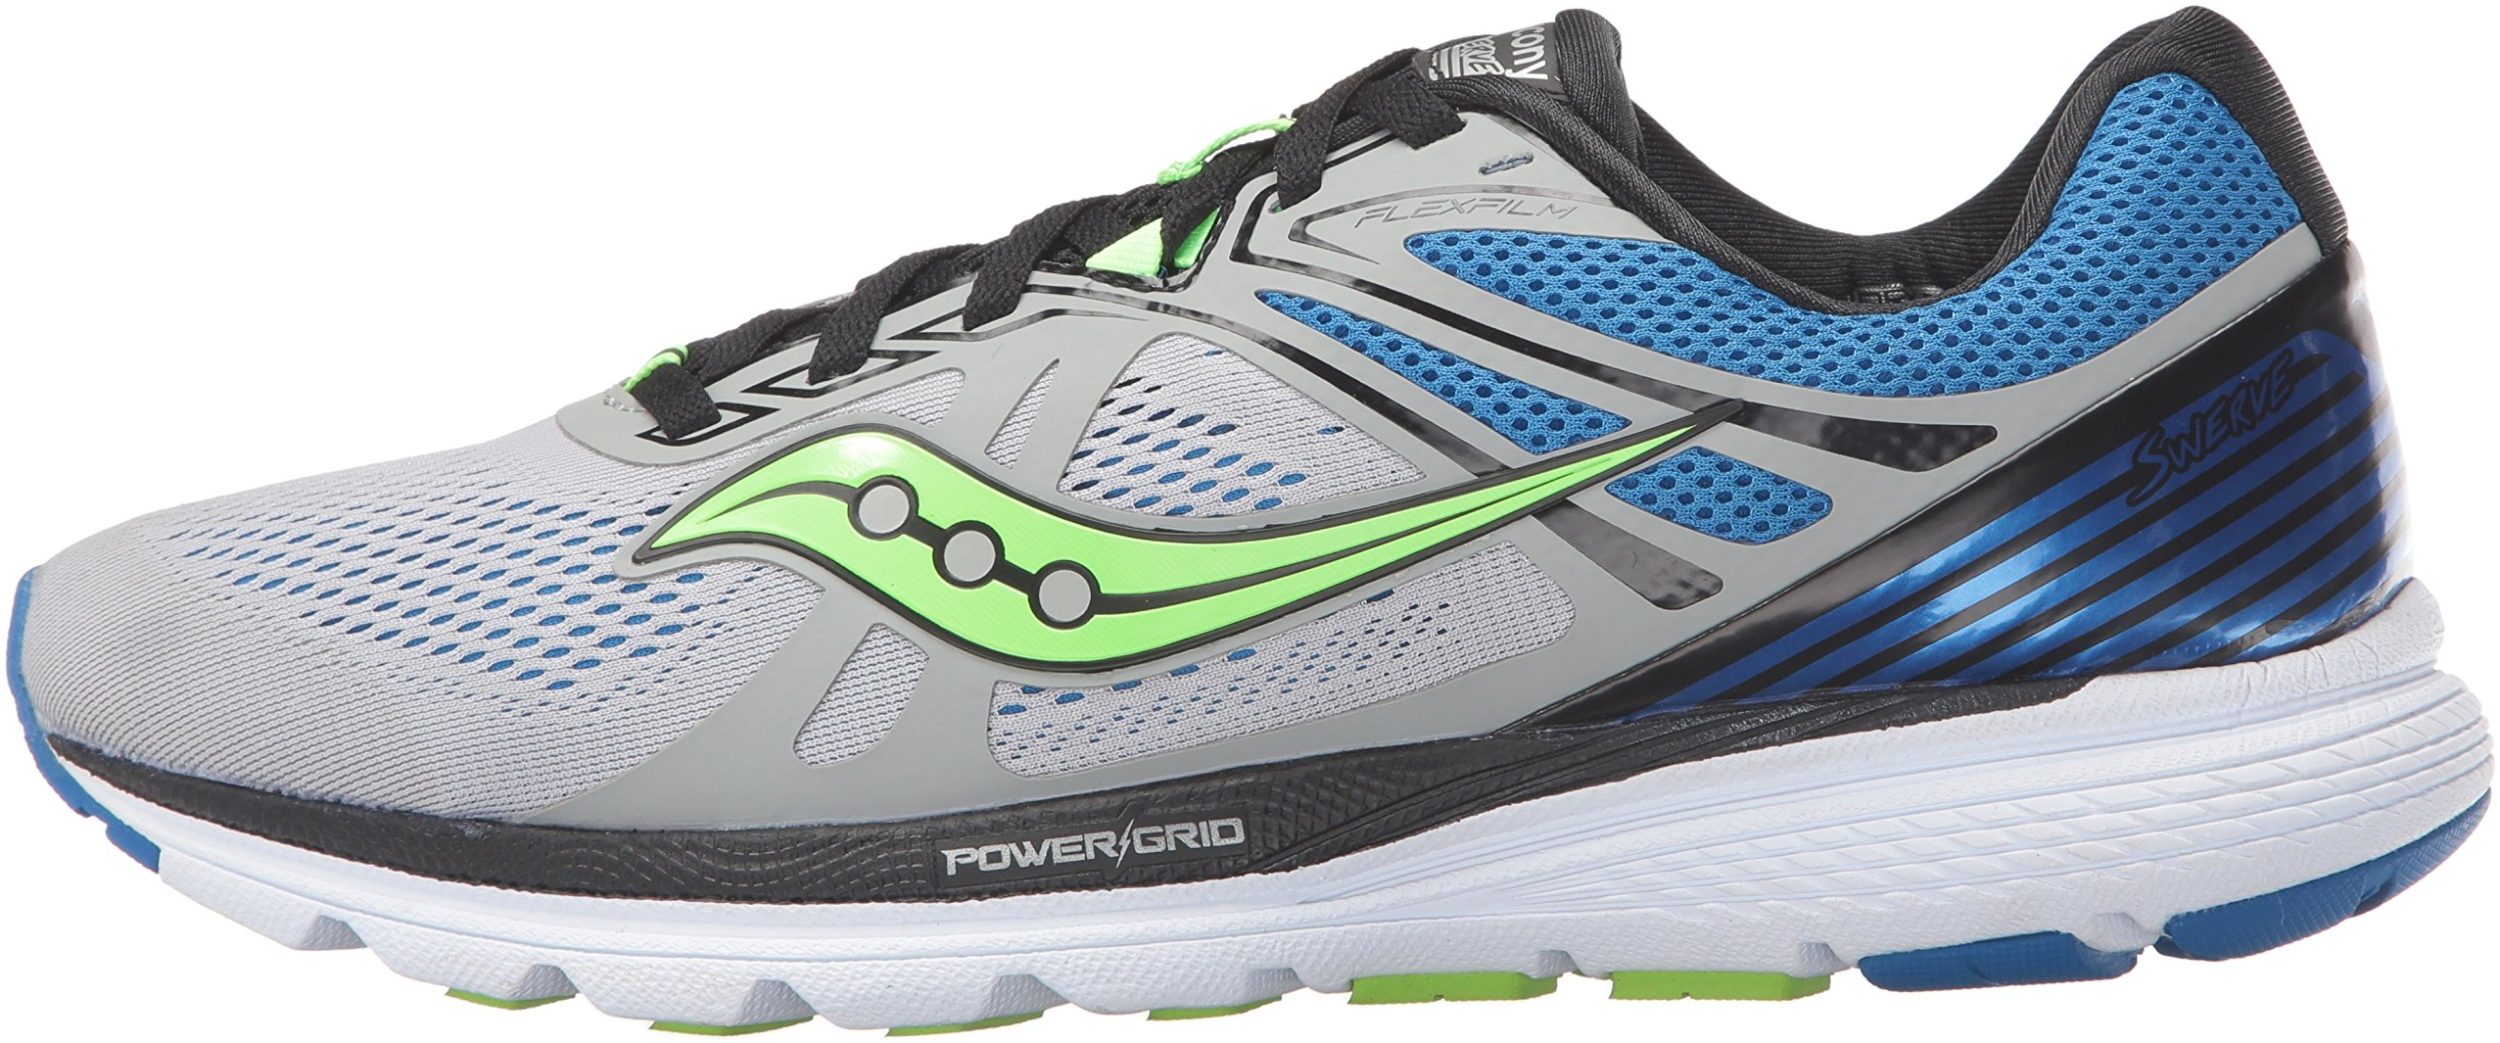 8 Reasons to/NOT to Buy Saucony Swerve 